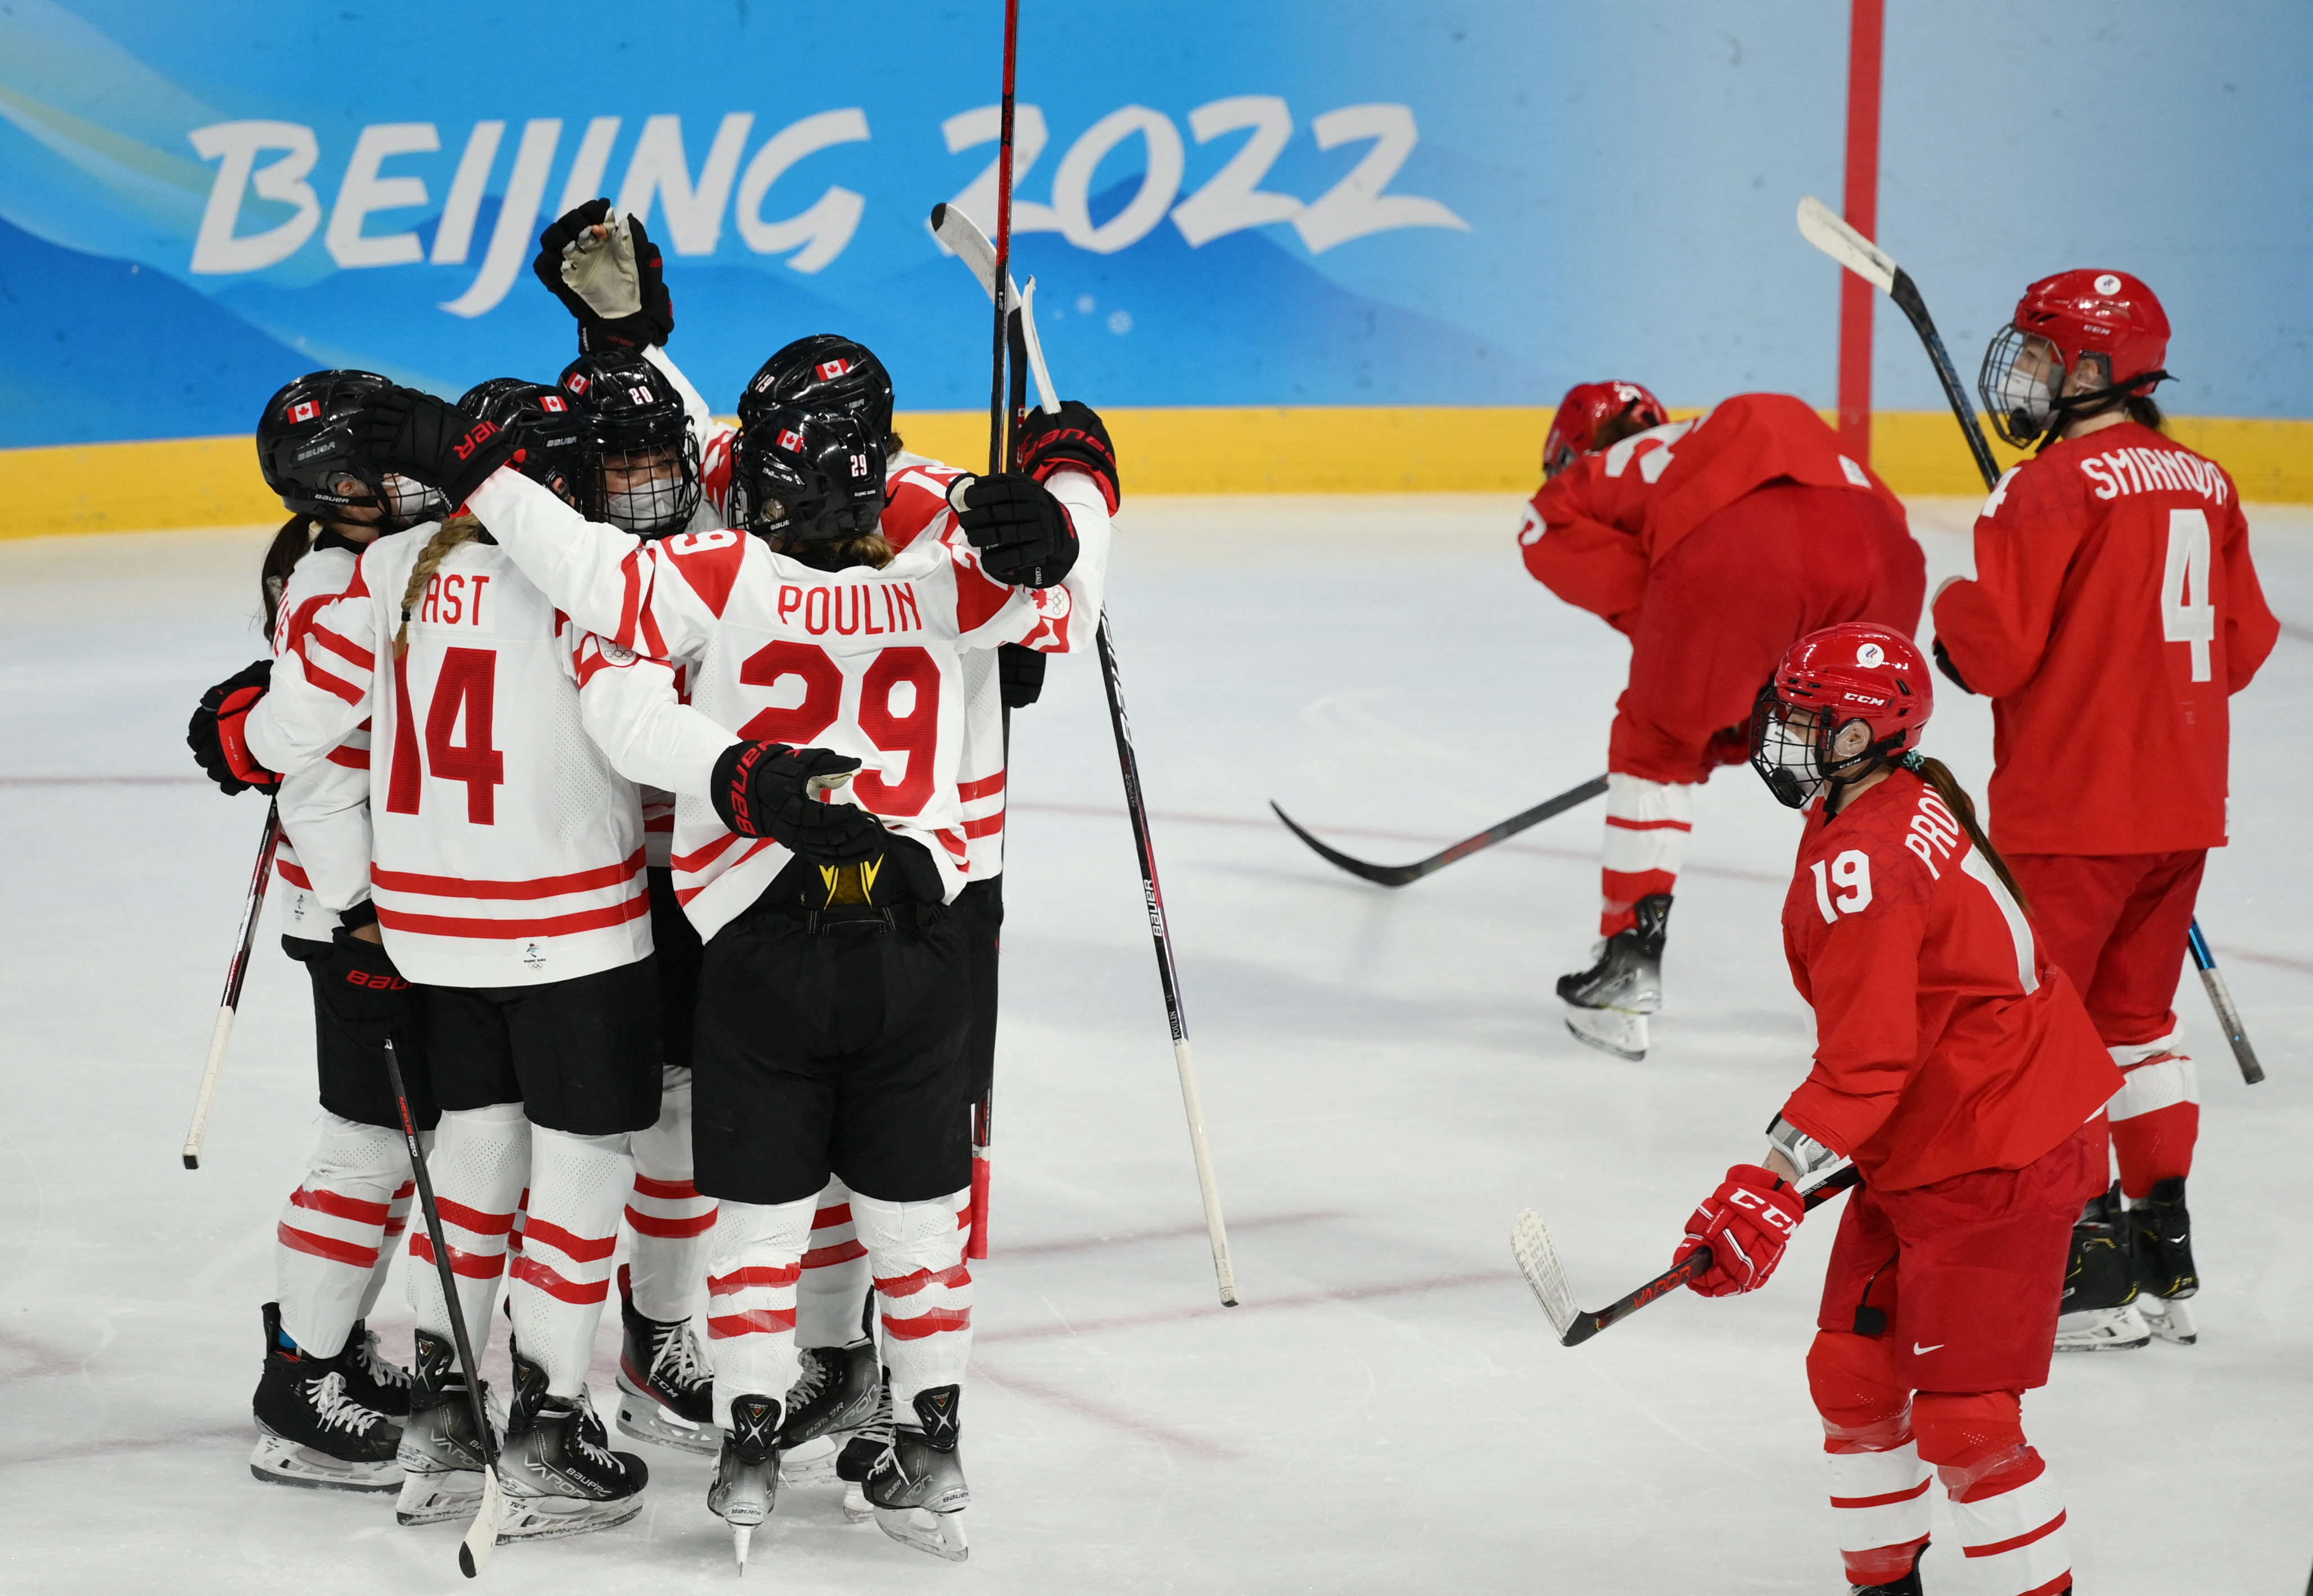 Ice Hockey - Women's Prelim. Round - Group A - Russian Olympic Committee v Canada